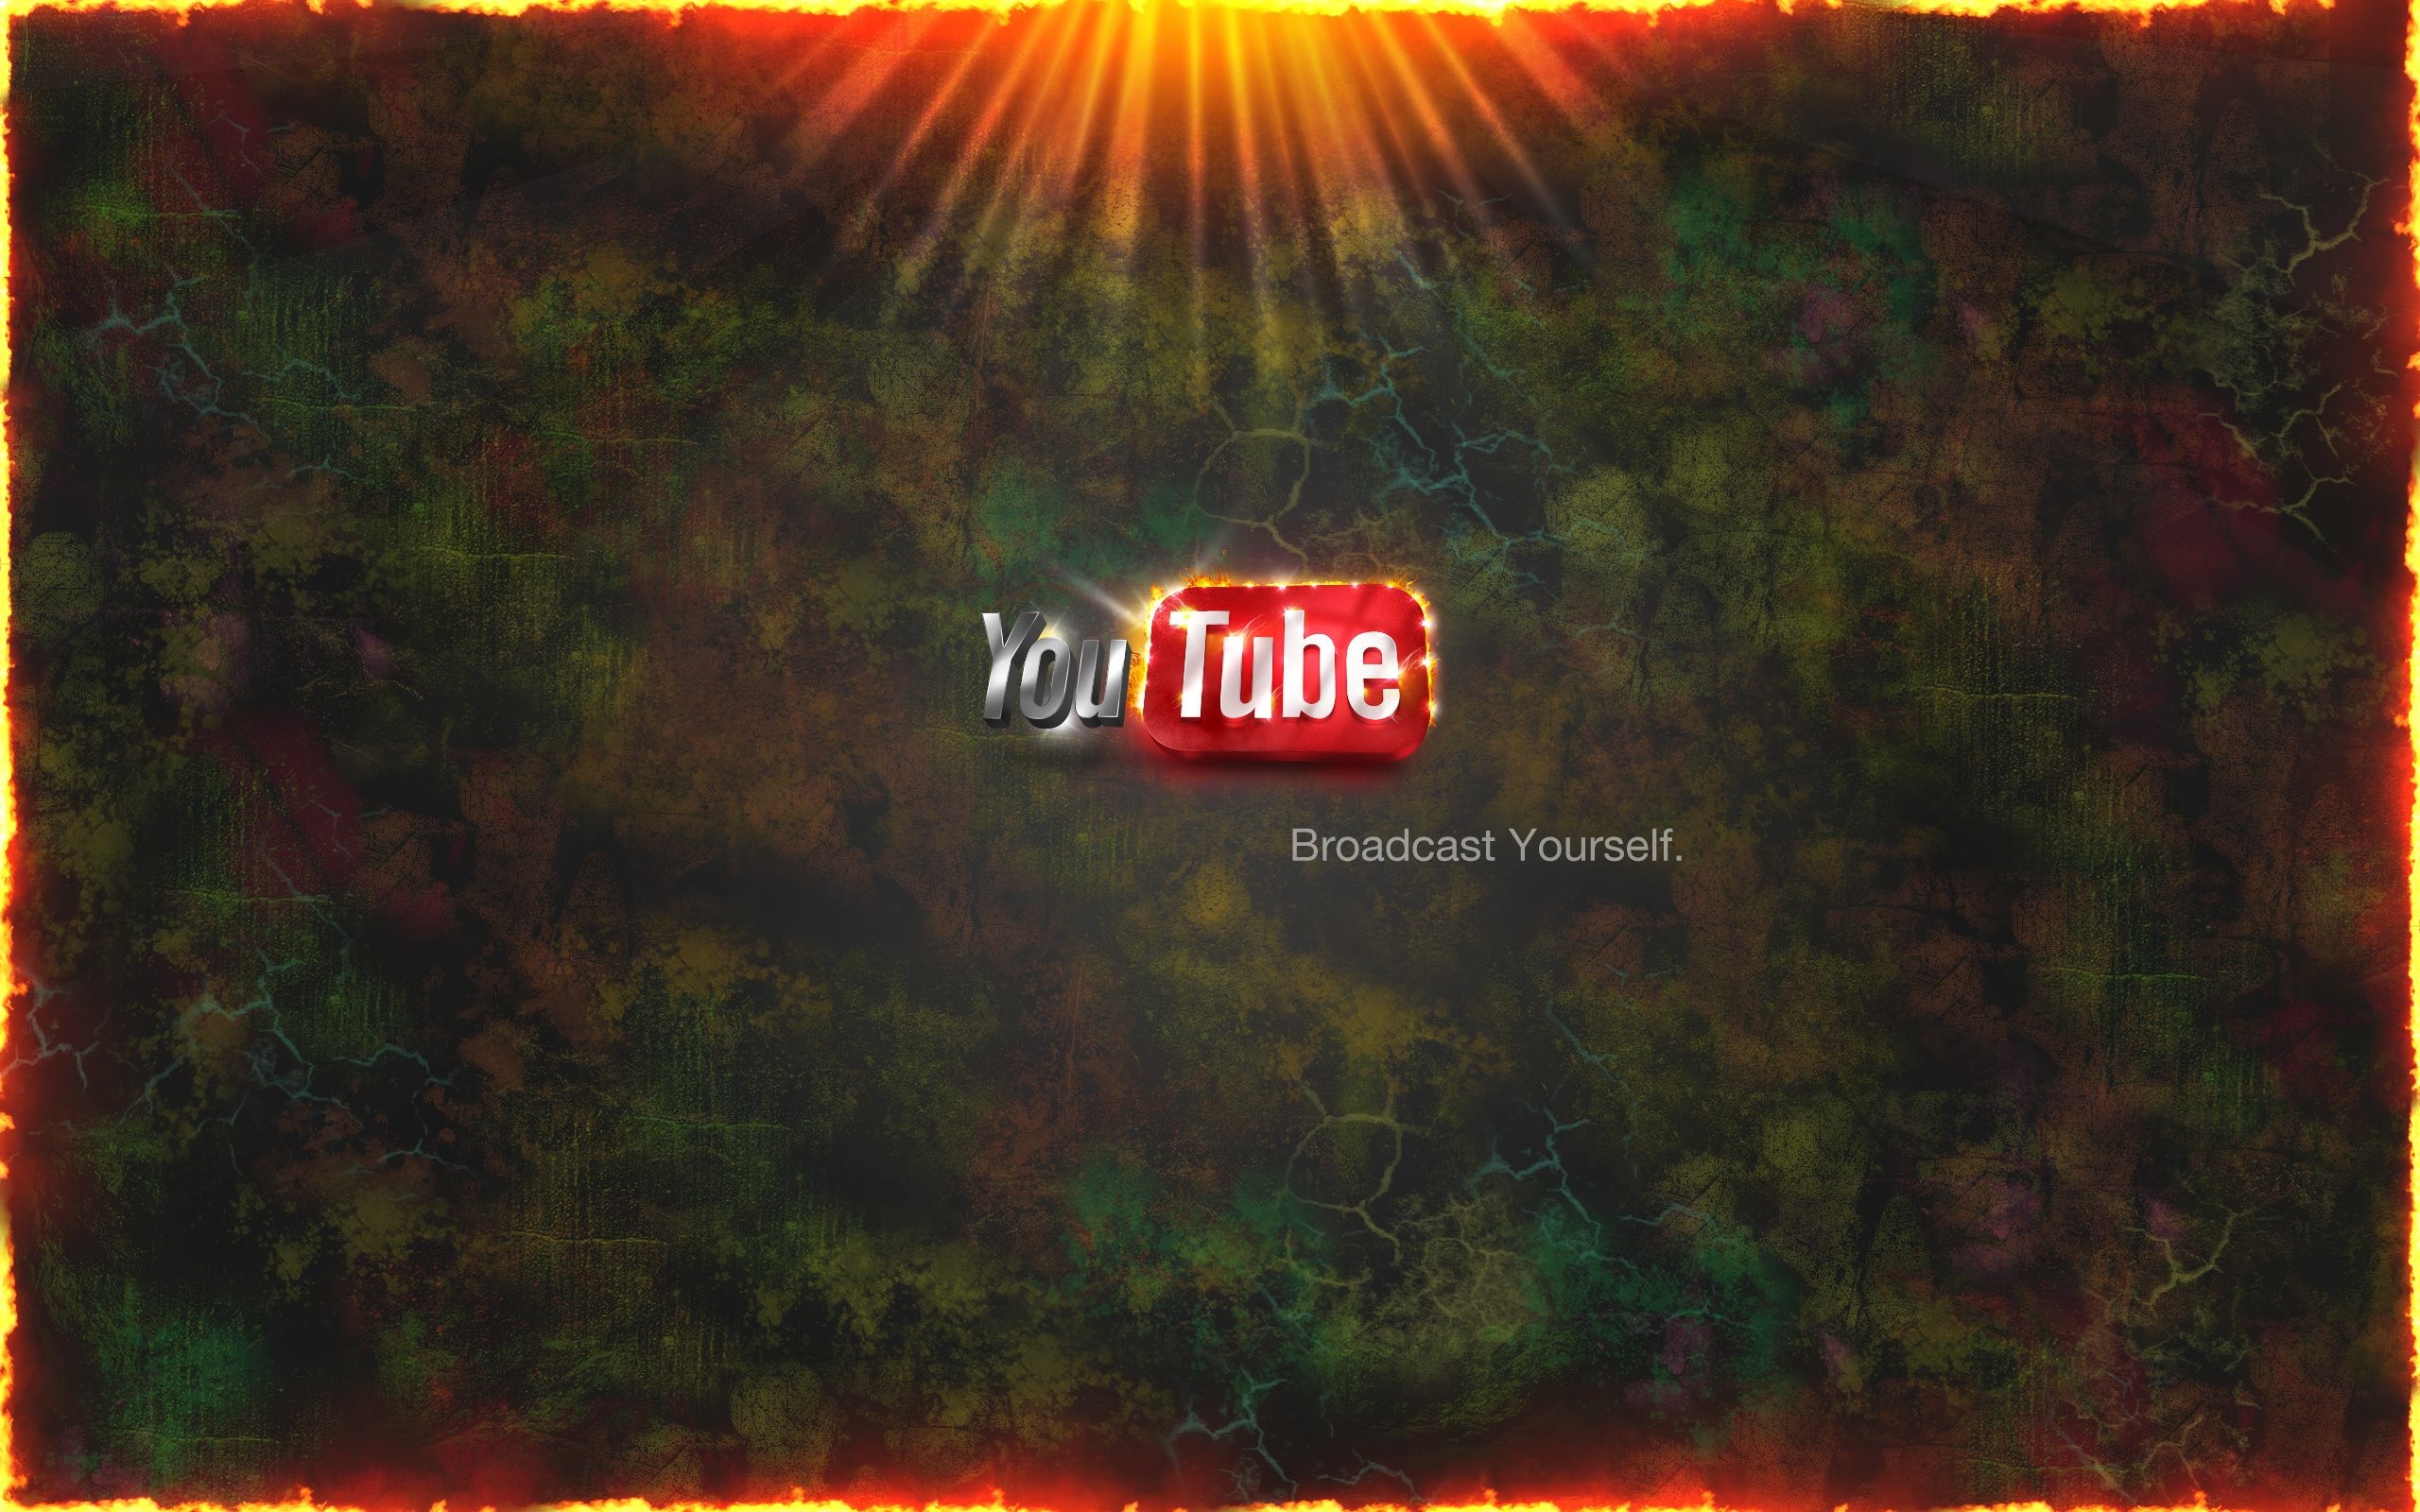 Youtube Backgrounds Photos Images Download 2560x1600